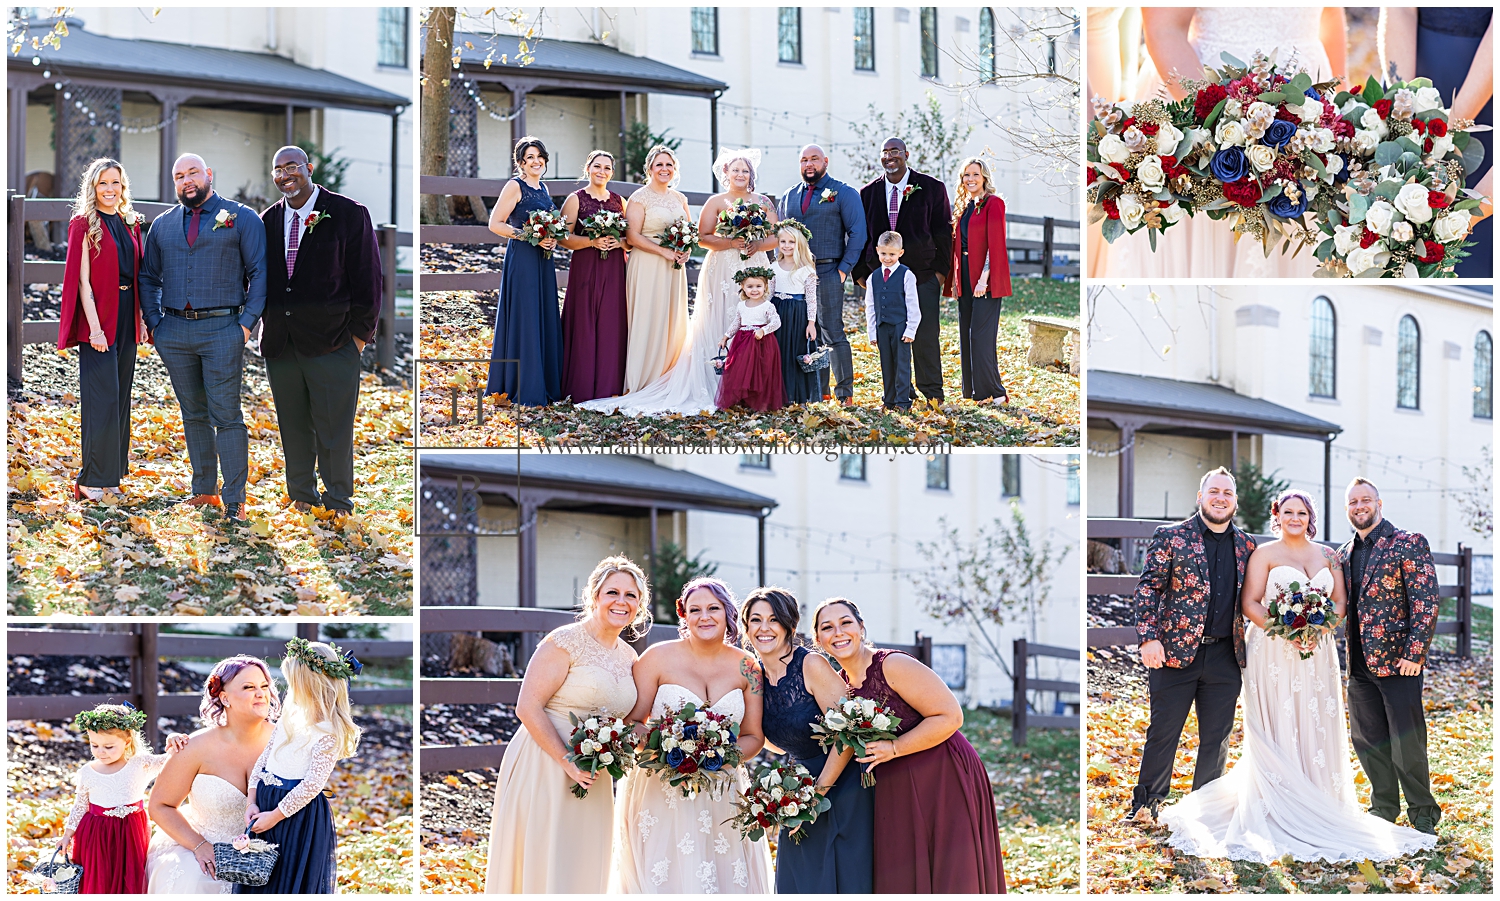 Bridal party pose with bride and groom at fall wedding